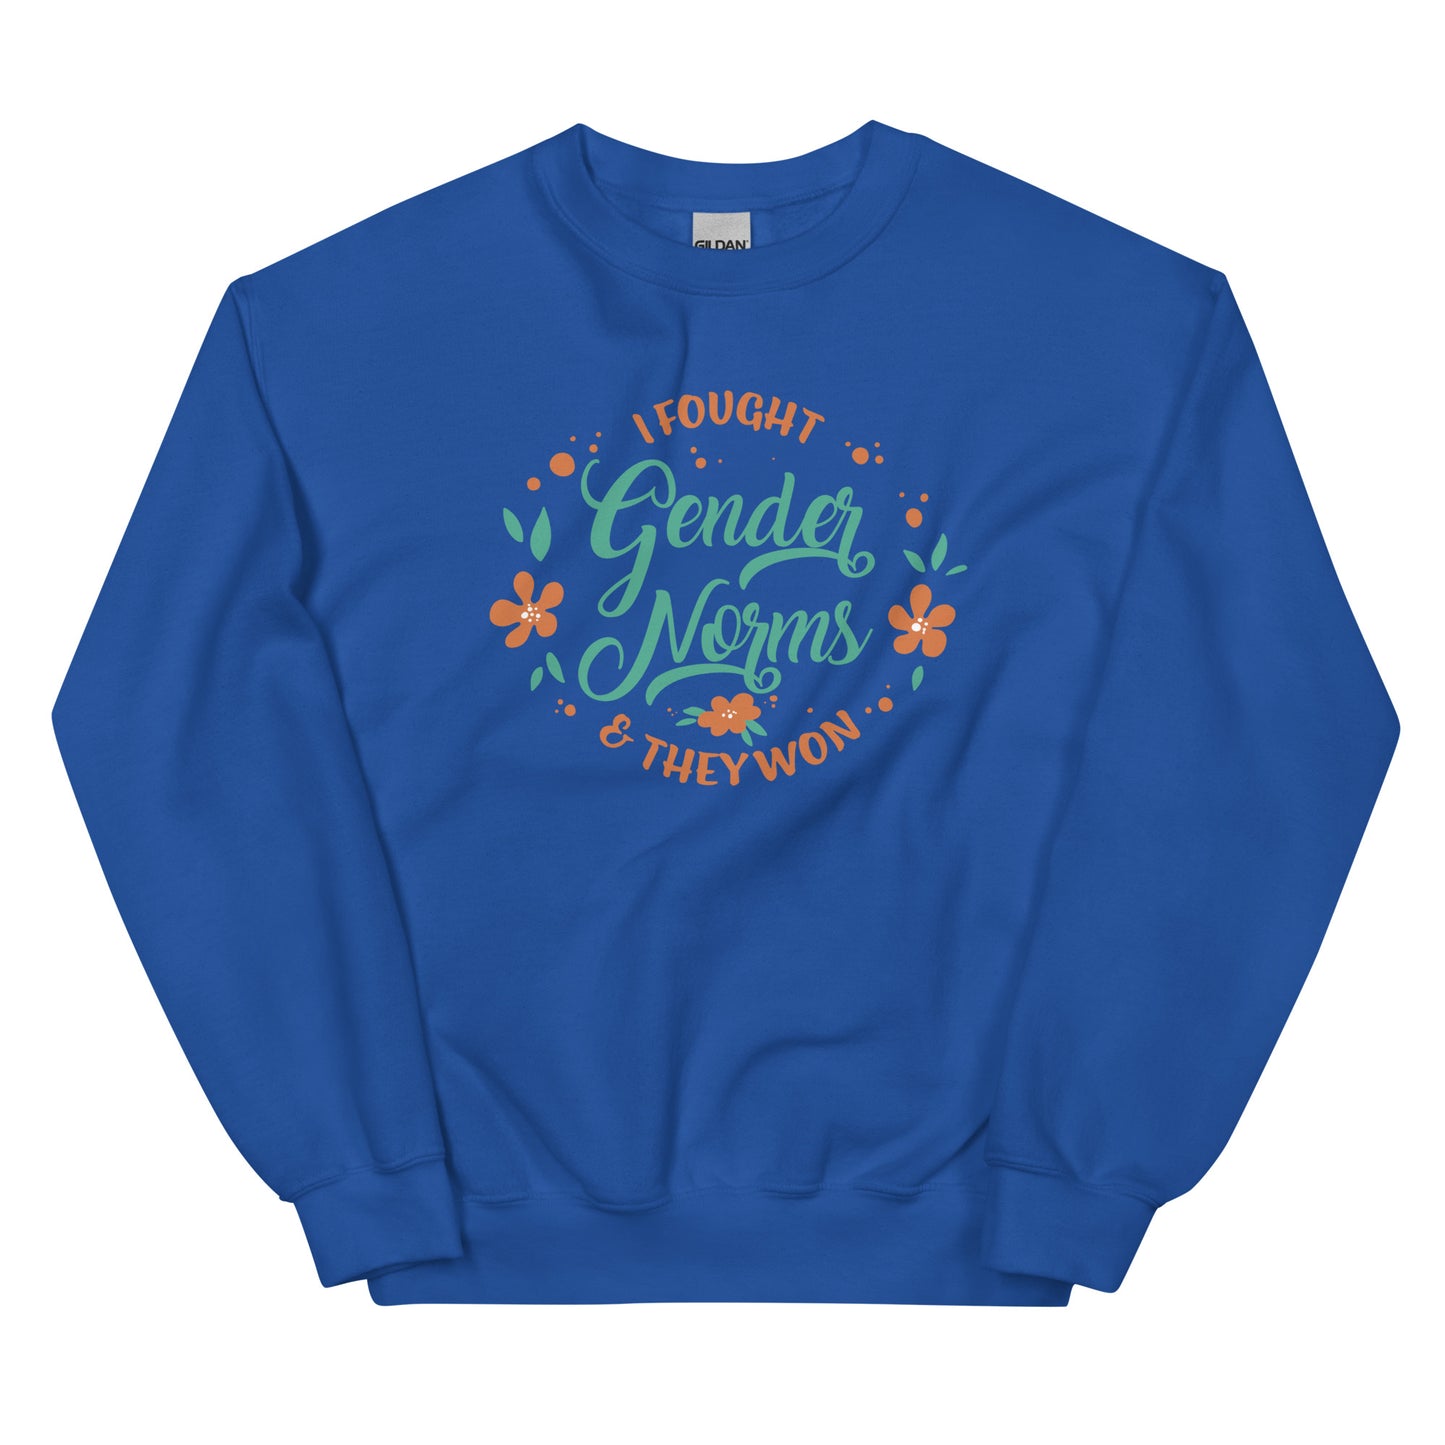 I Fought Gender Norms and They Won Unisex Sweatshirt